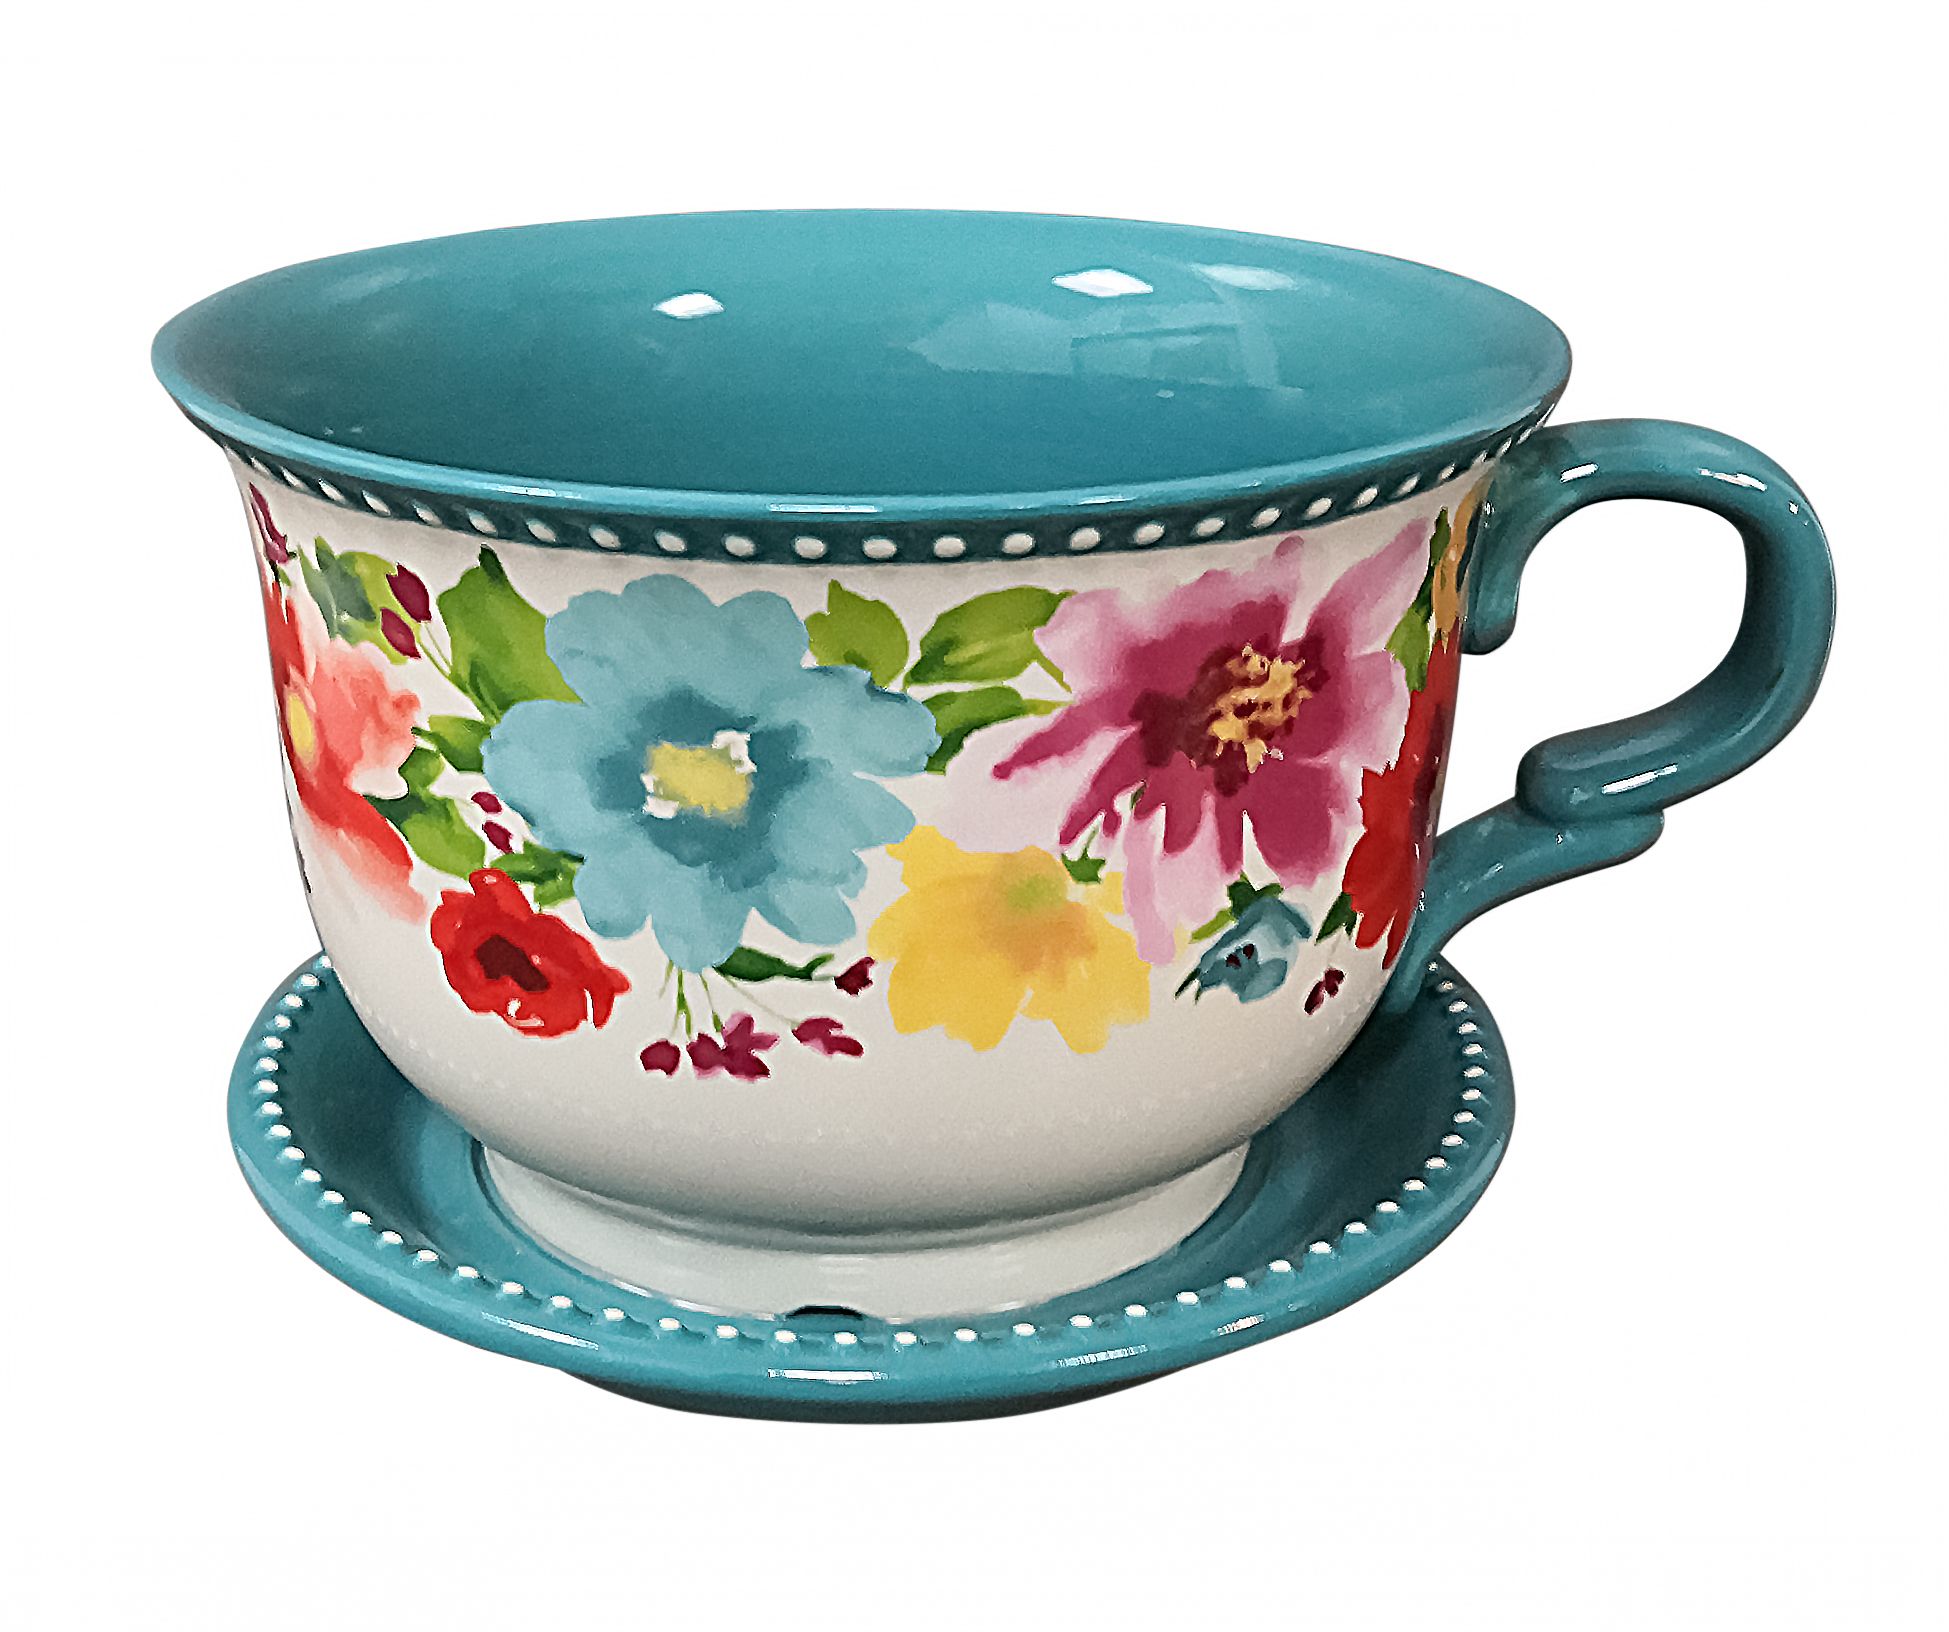 The Pioneer Woman Breezy Blossoms 10-Inch Teacup Planter